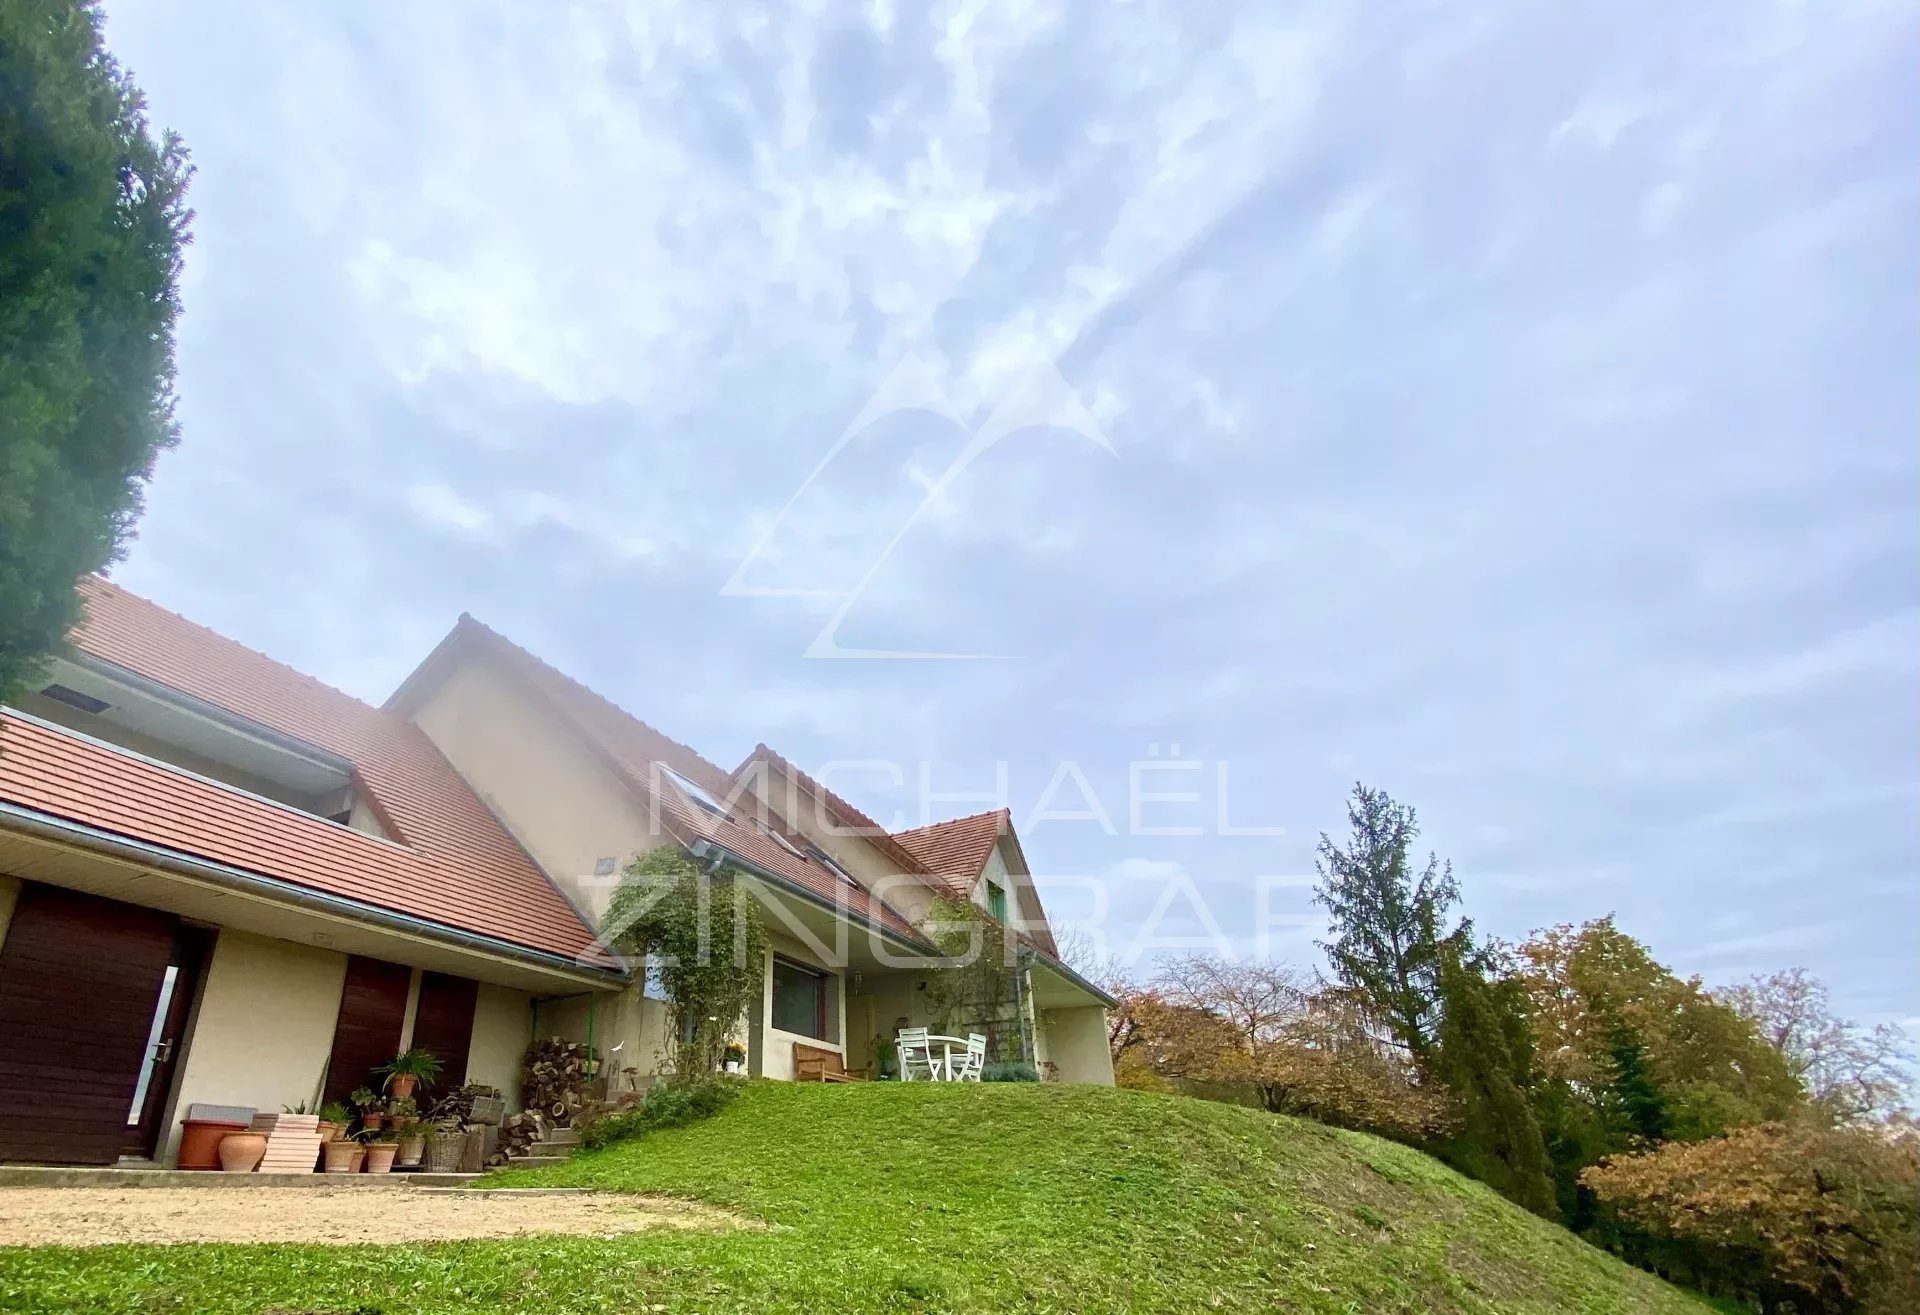 Architect-designed house with land, stables, and riding arena in a commanding position.